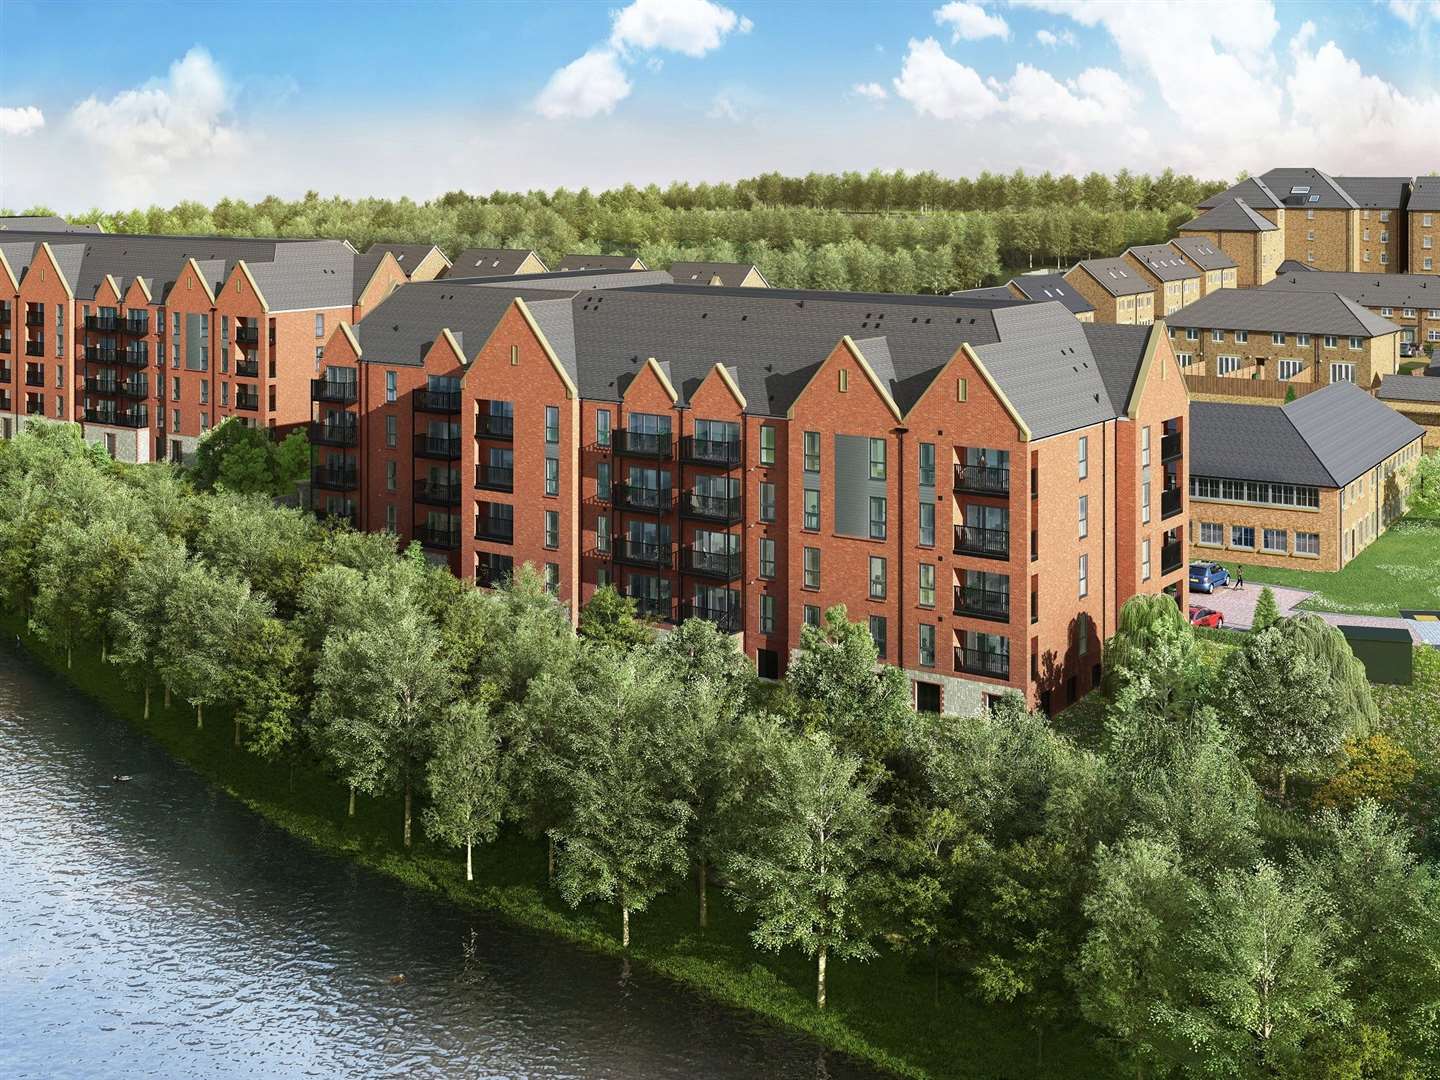 A CGI of the Redrow apartments being built at Whatman Mill in Maidstone